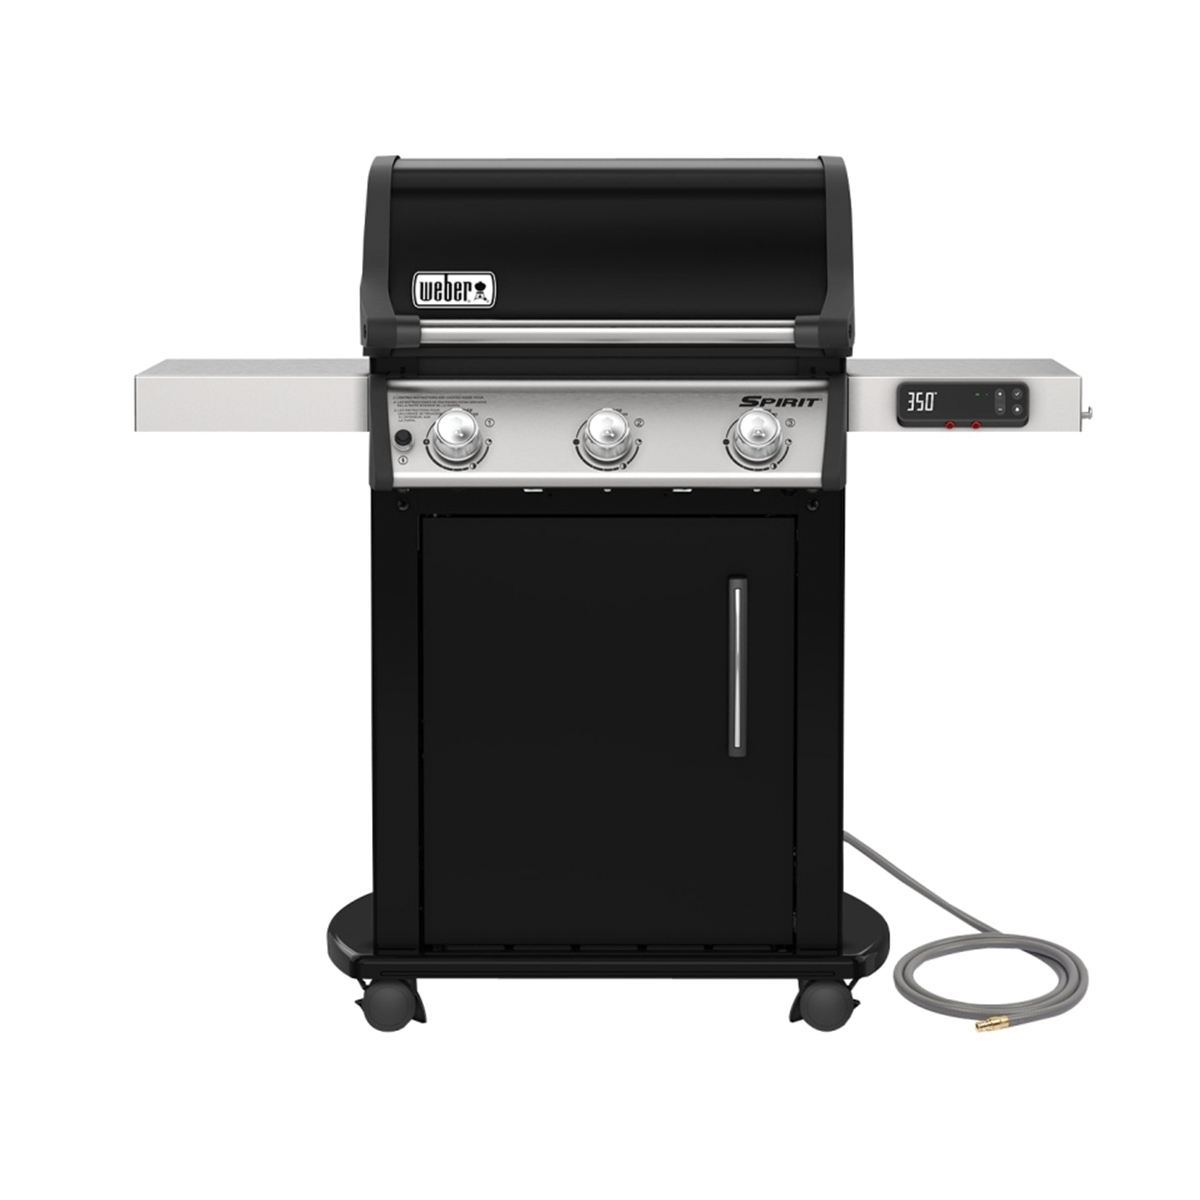 Spirit EX-315 Series 47512401 Gas Grill, 39,000 Btu, Natural Gas, 3-Burner, 424 sq-in Primary Cooking Surface